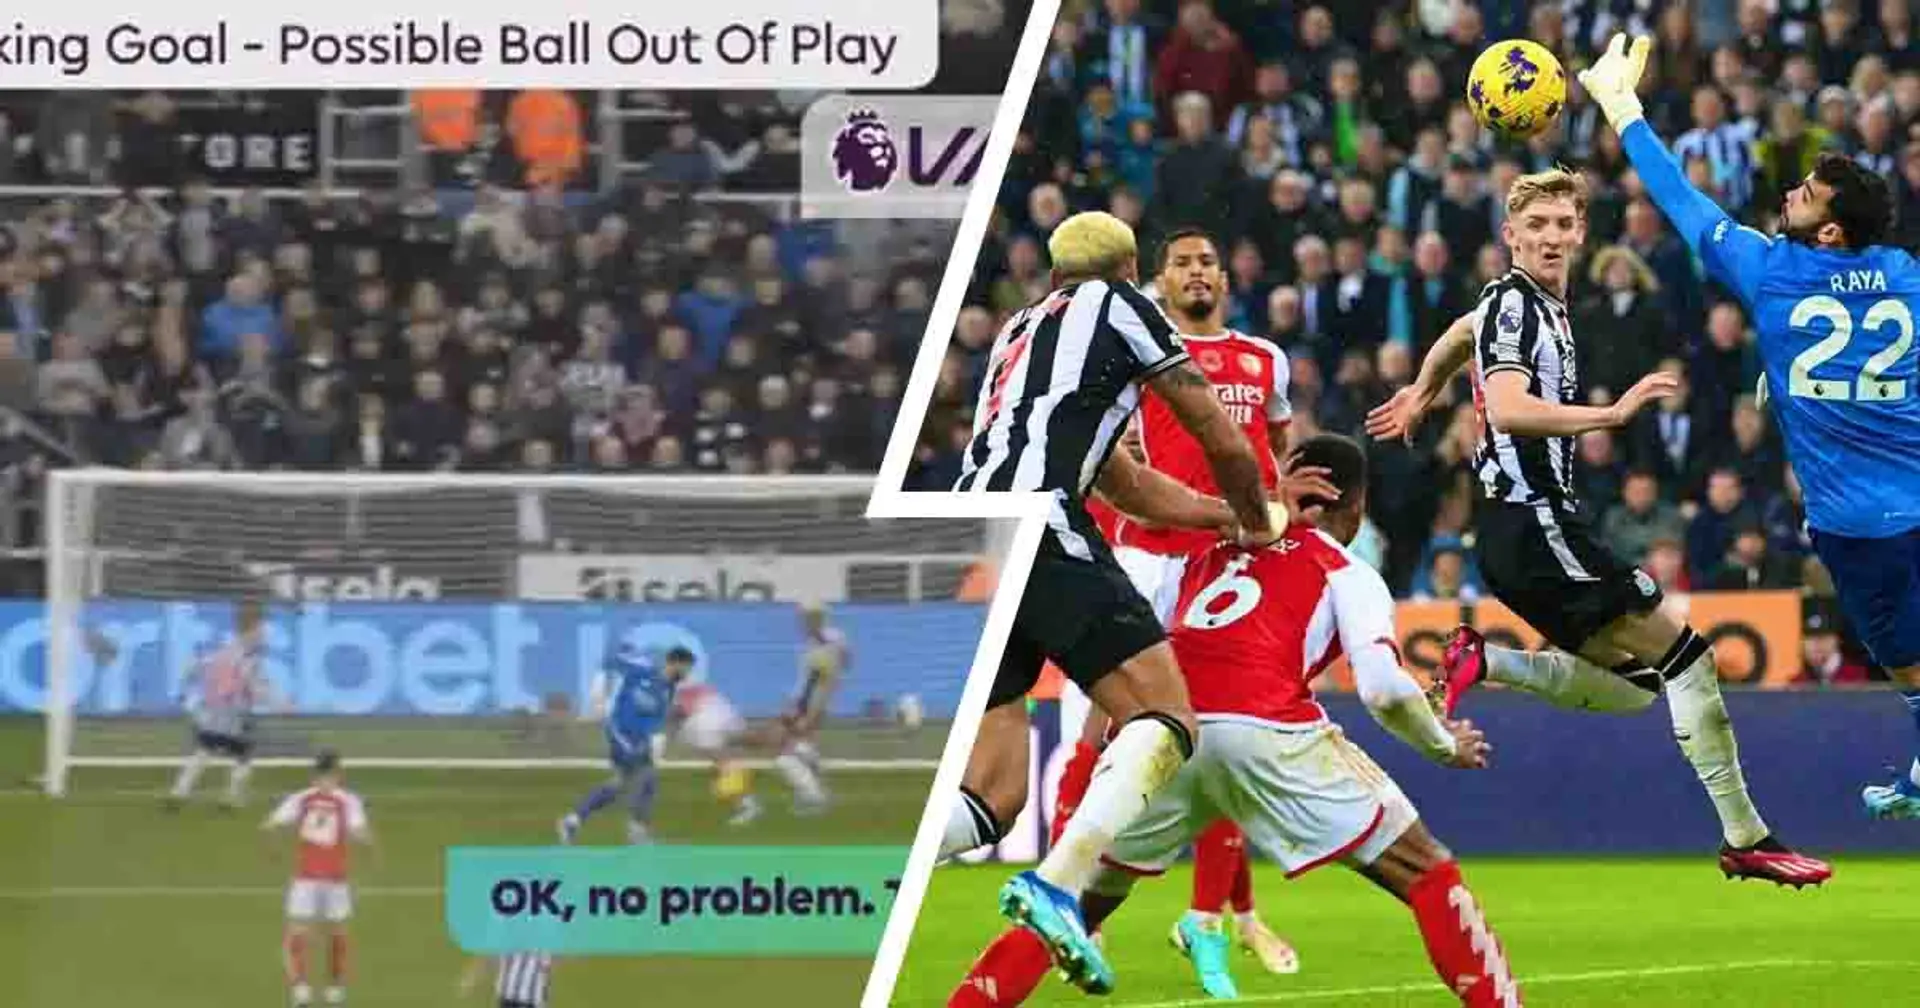 'I don't see a foul on Gabriel': PGMOL release VAR audio for controversial Anthony Gordon goal vs Arsenal